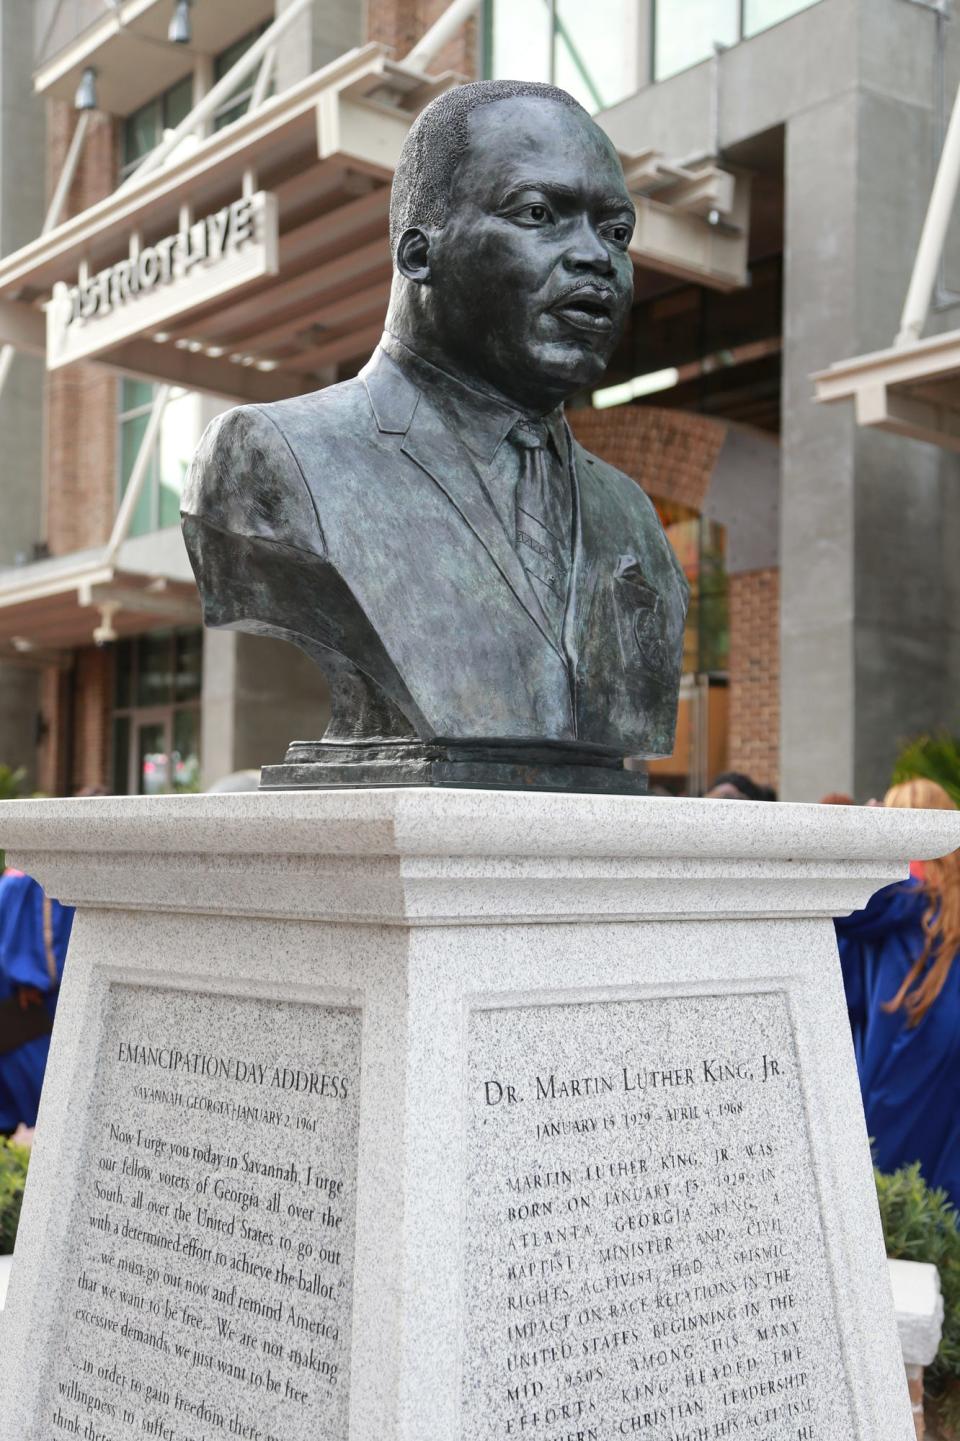 Saturday before unveiling the Martin Luther King, Jr Commemorative Memorial at Plant Riverside District.